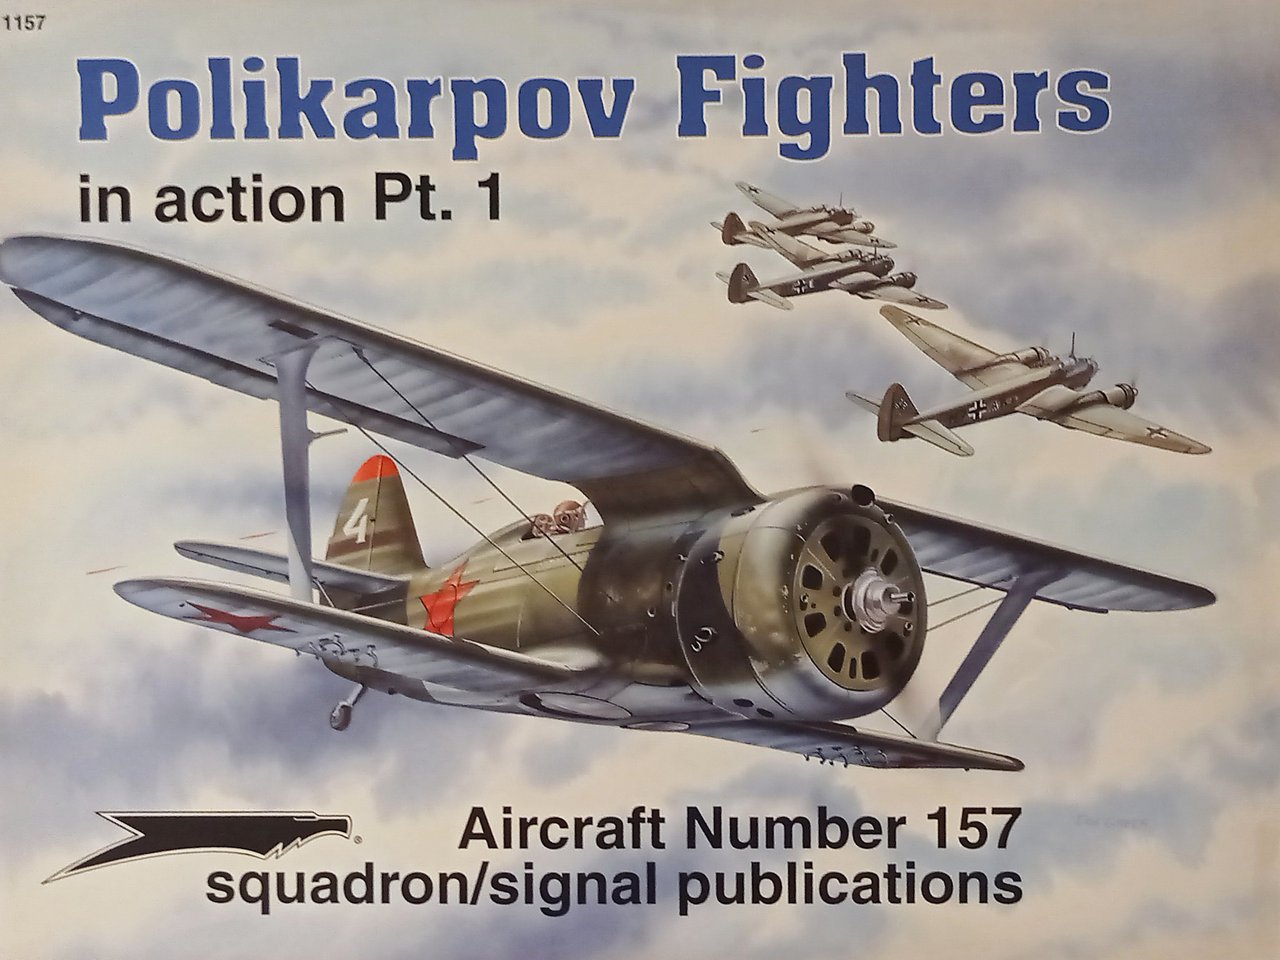 Aircraft N. 157 - Polikarpov Fighters in action - Pt. …